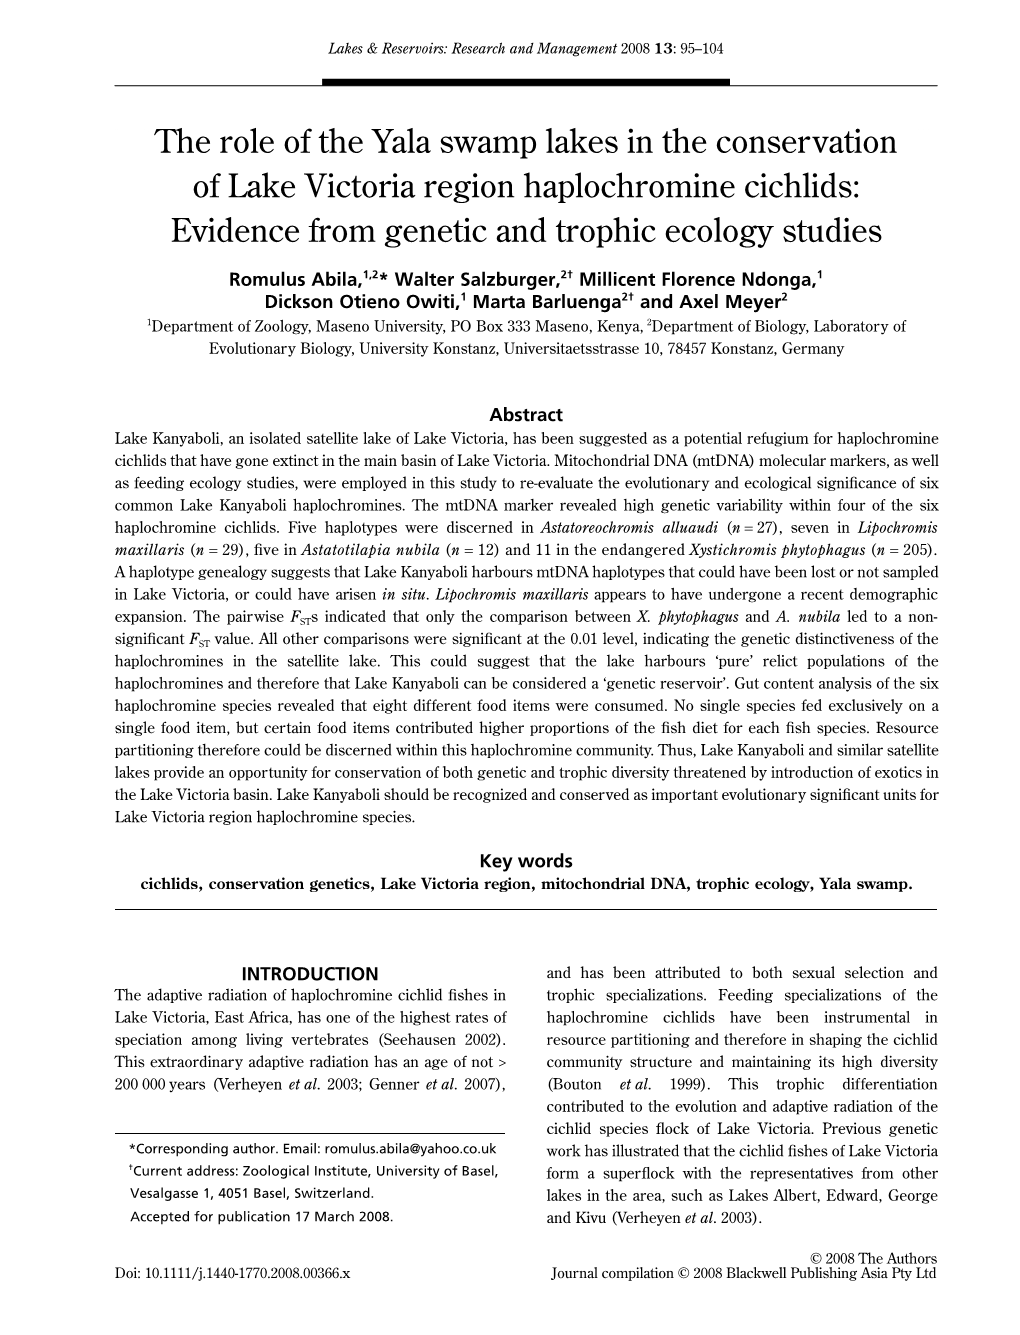 The Role of the Yala Swamp Lakes in the Conservation Of